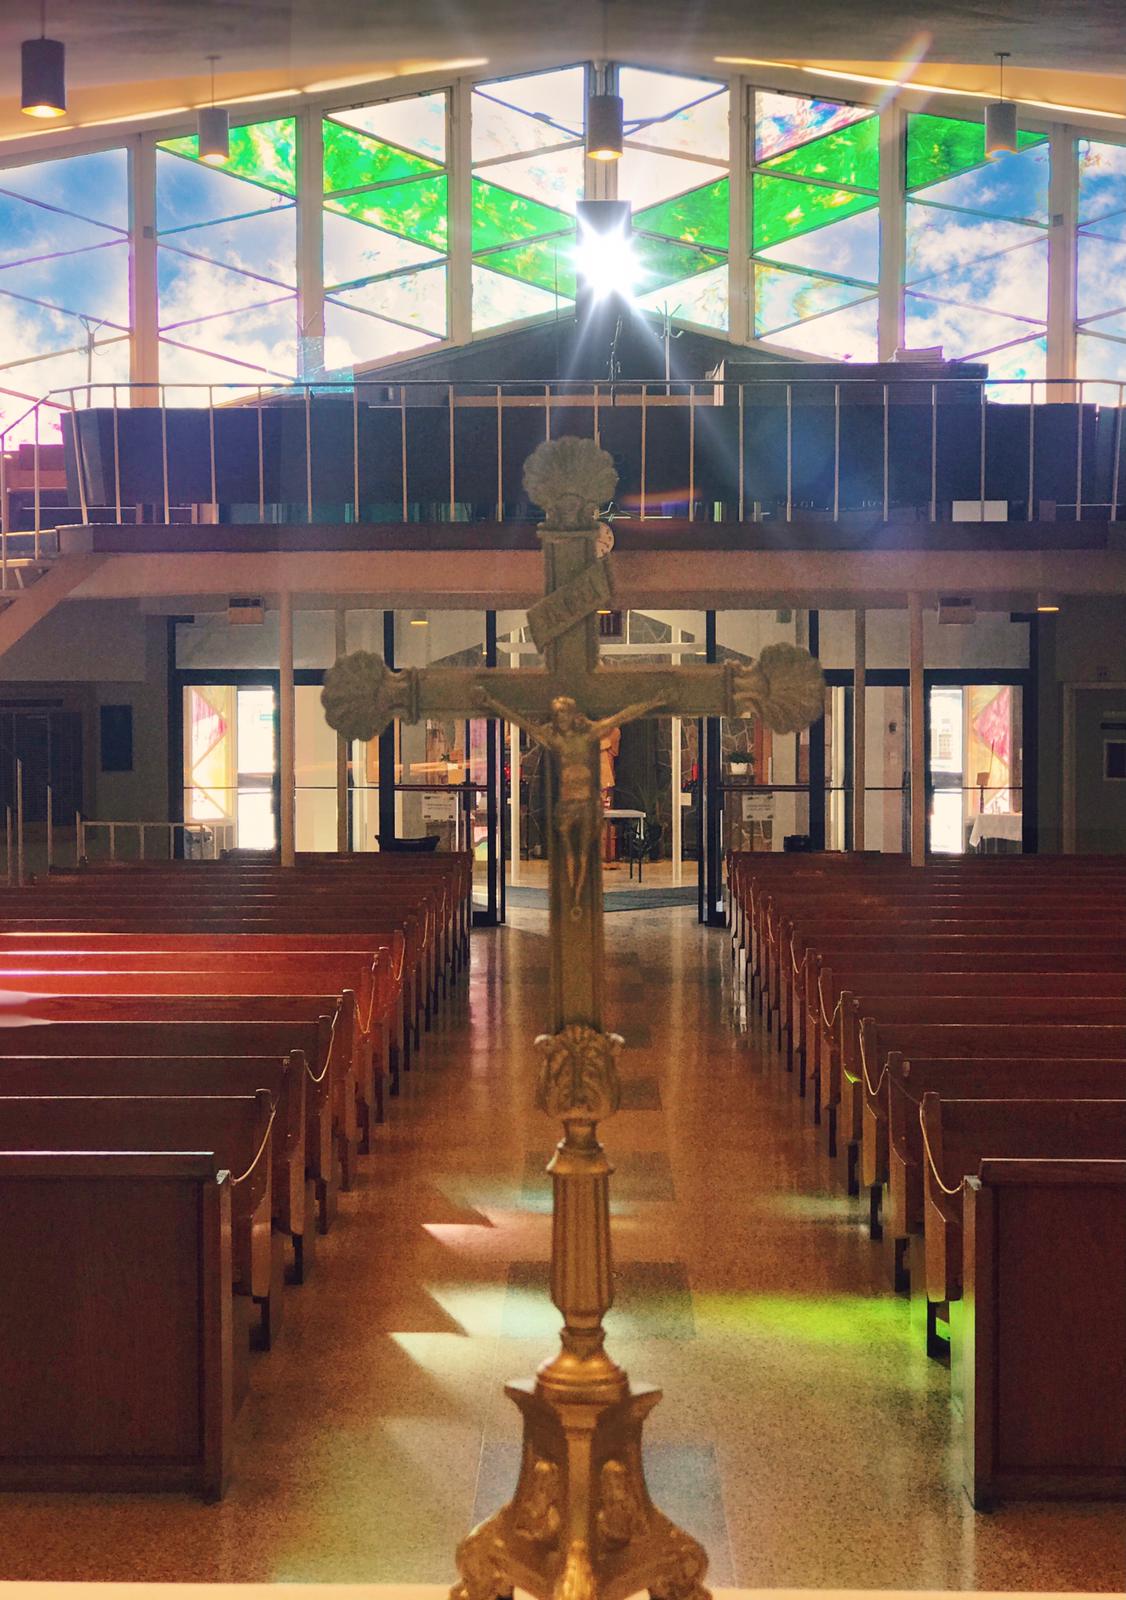 Cross on altar with sun coming through stained glass windows. View of pews in background.